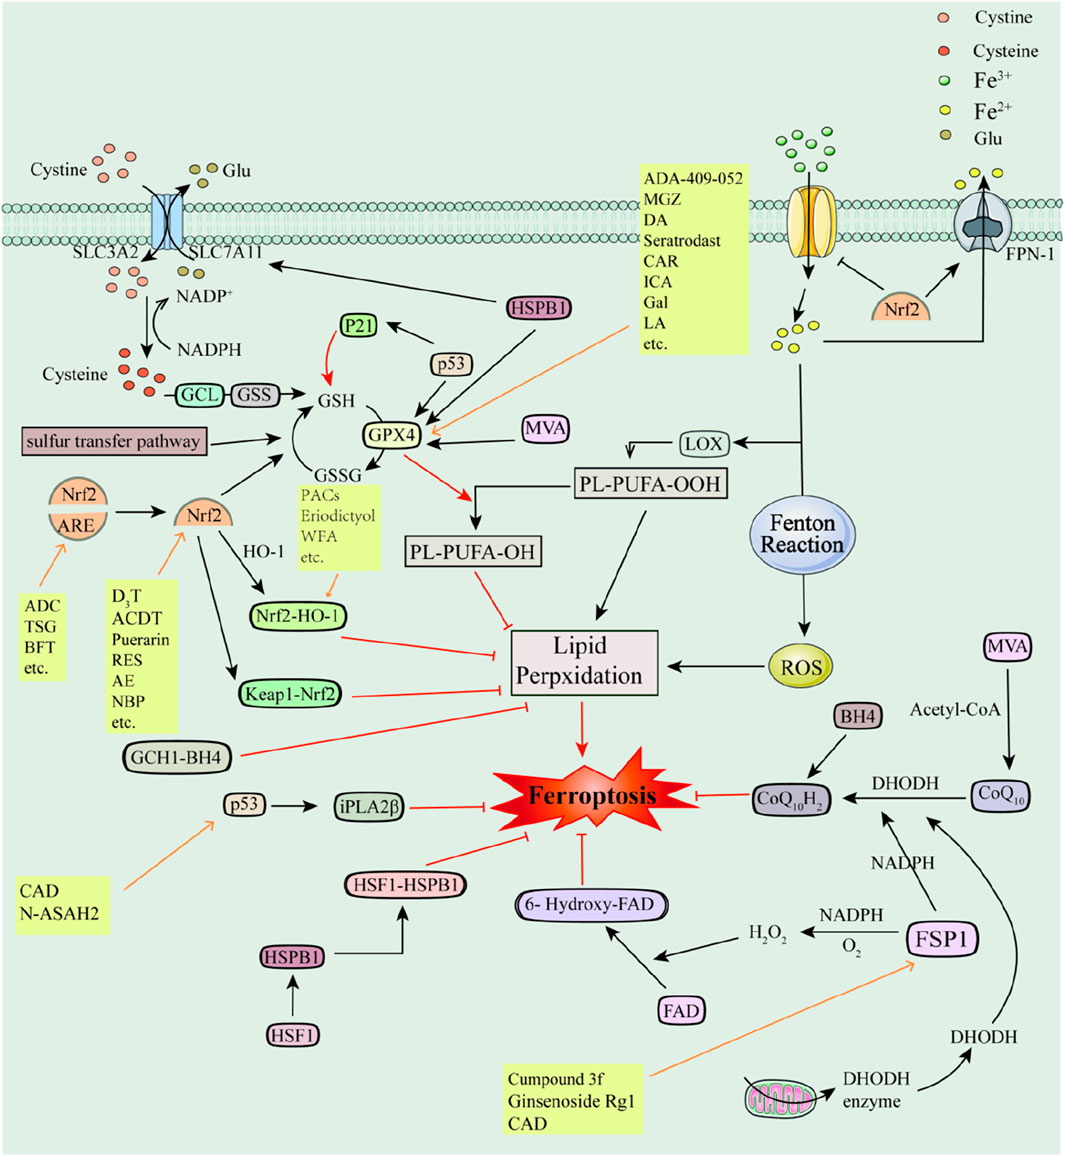 Frontiers | Ferroptosis inhibitors: past, present and future